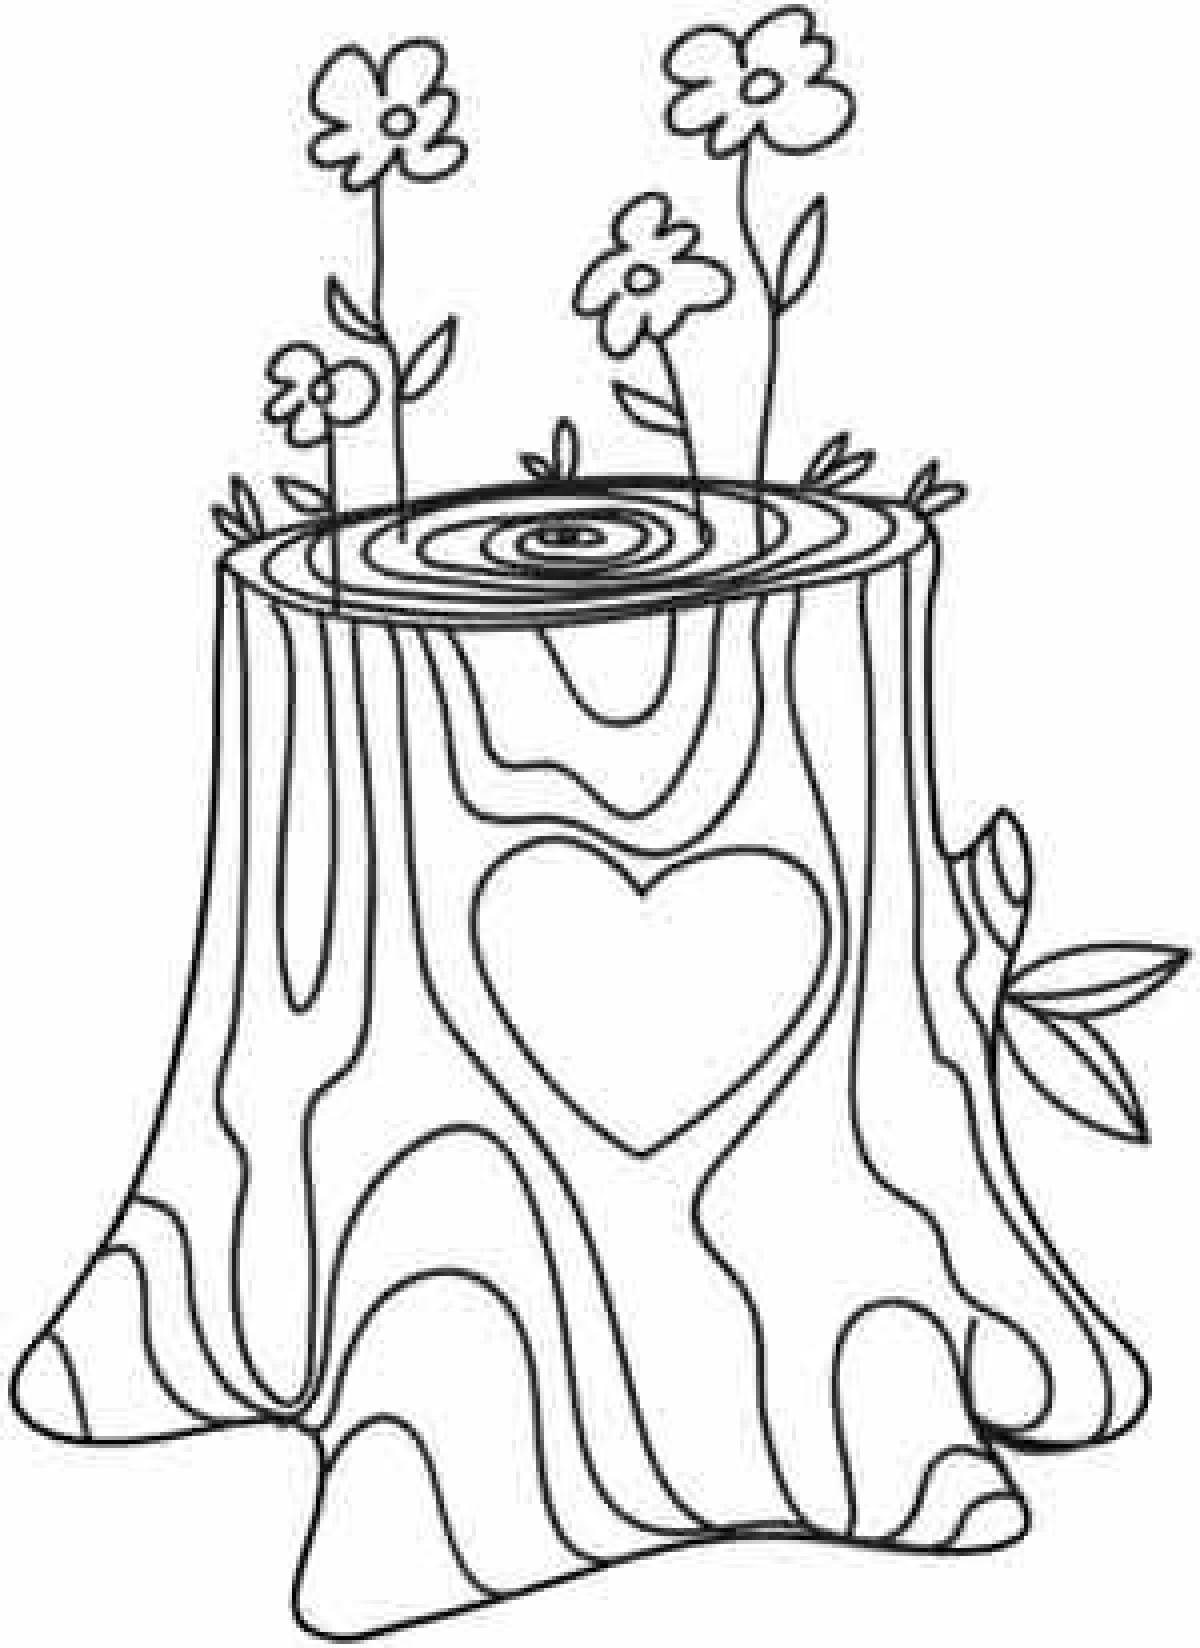 Stump with flowers